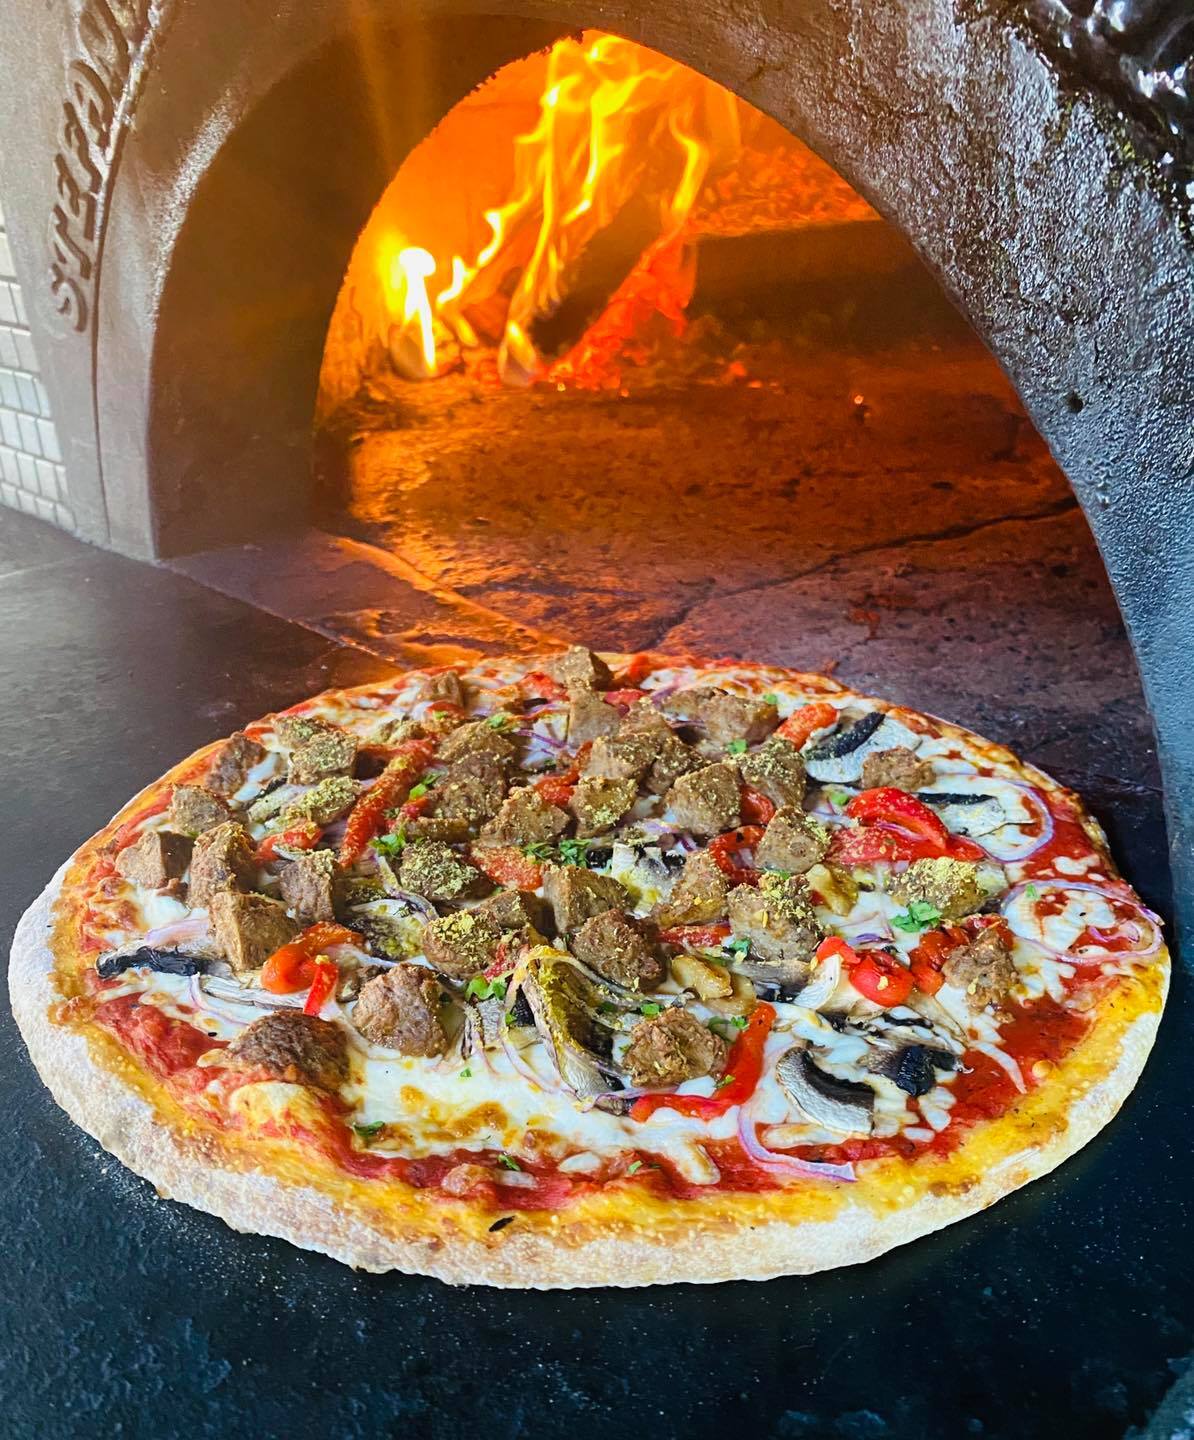 a vegan pizza covered in fresh, colourful toppings next to a glowing hot wood-fired clay oven.